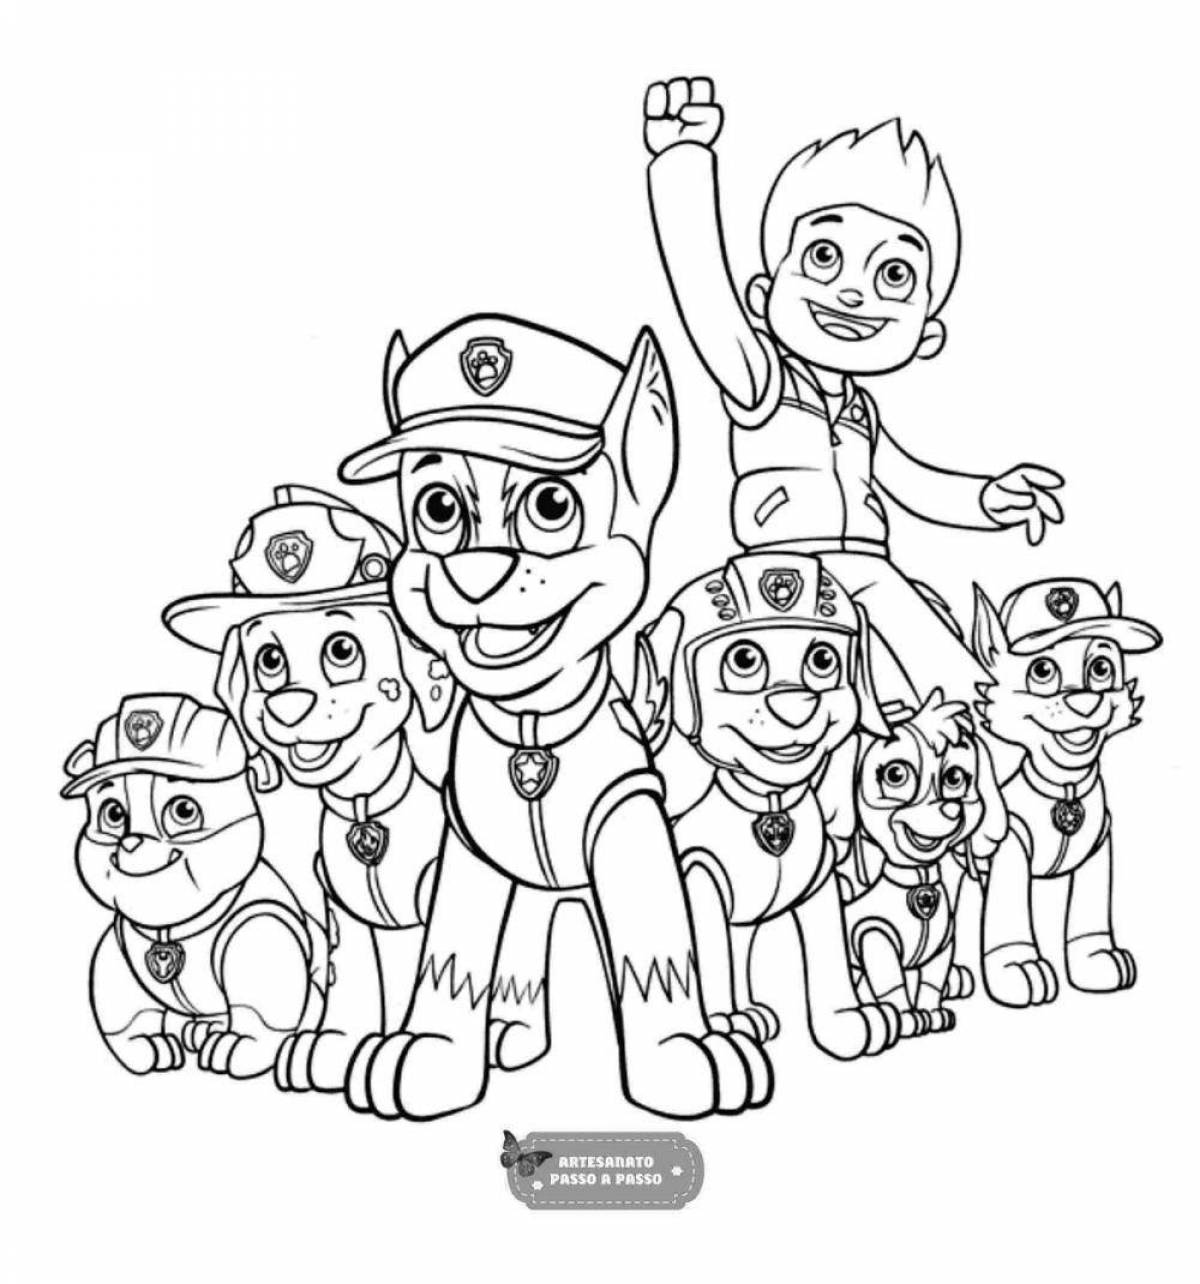 Awesome paw patrol coloring book